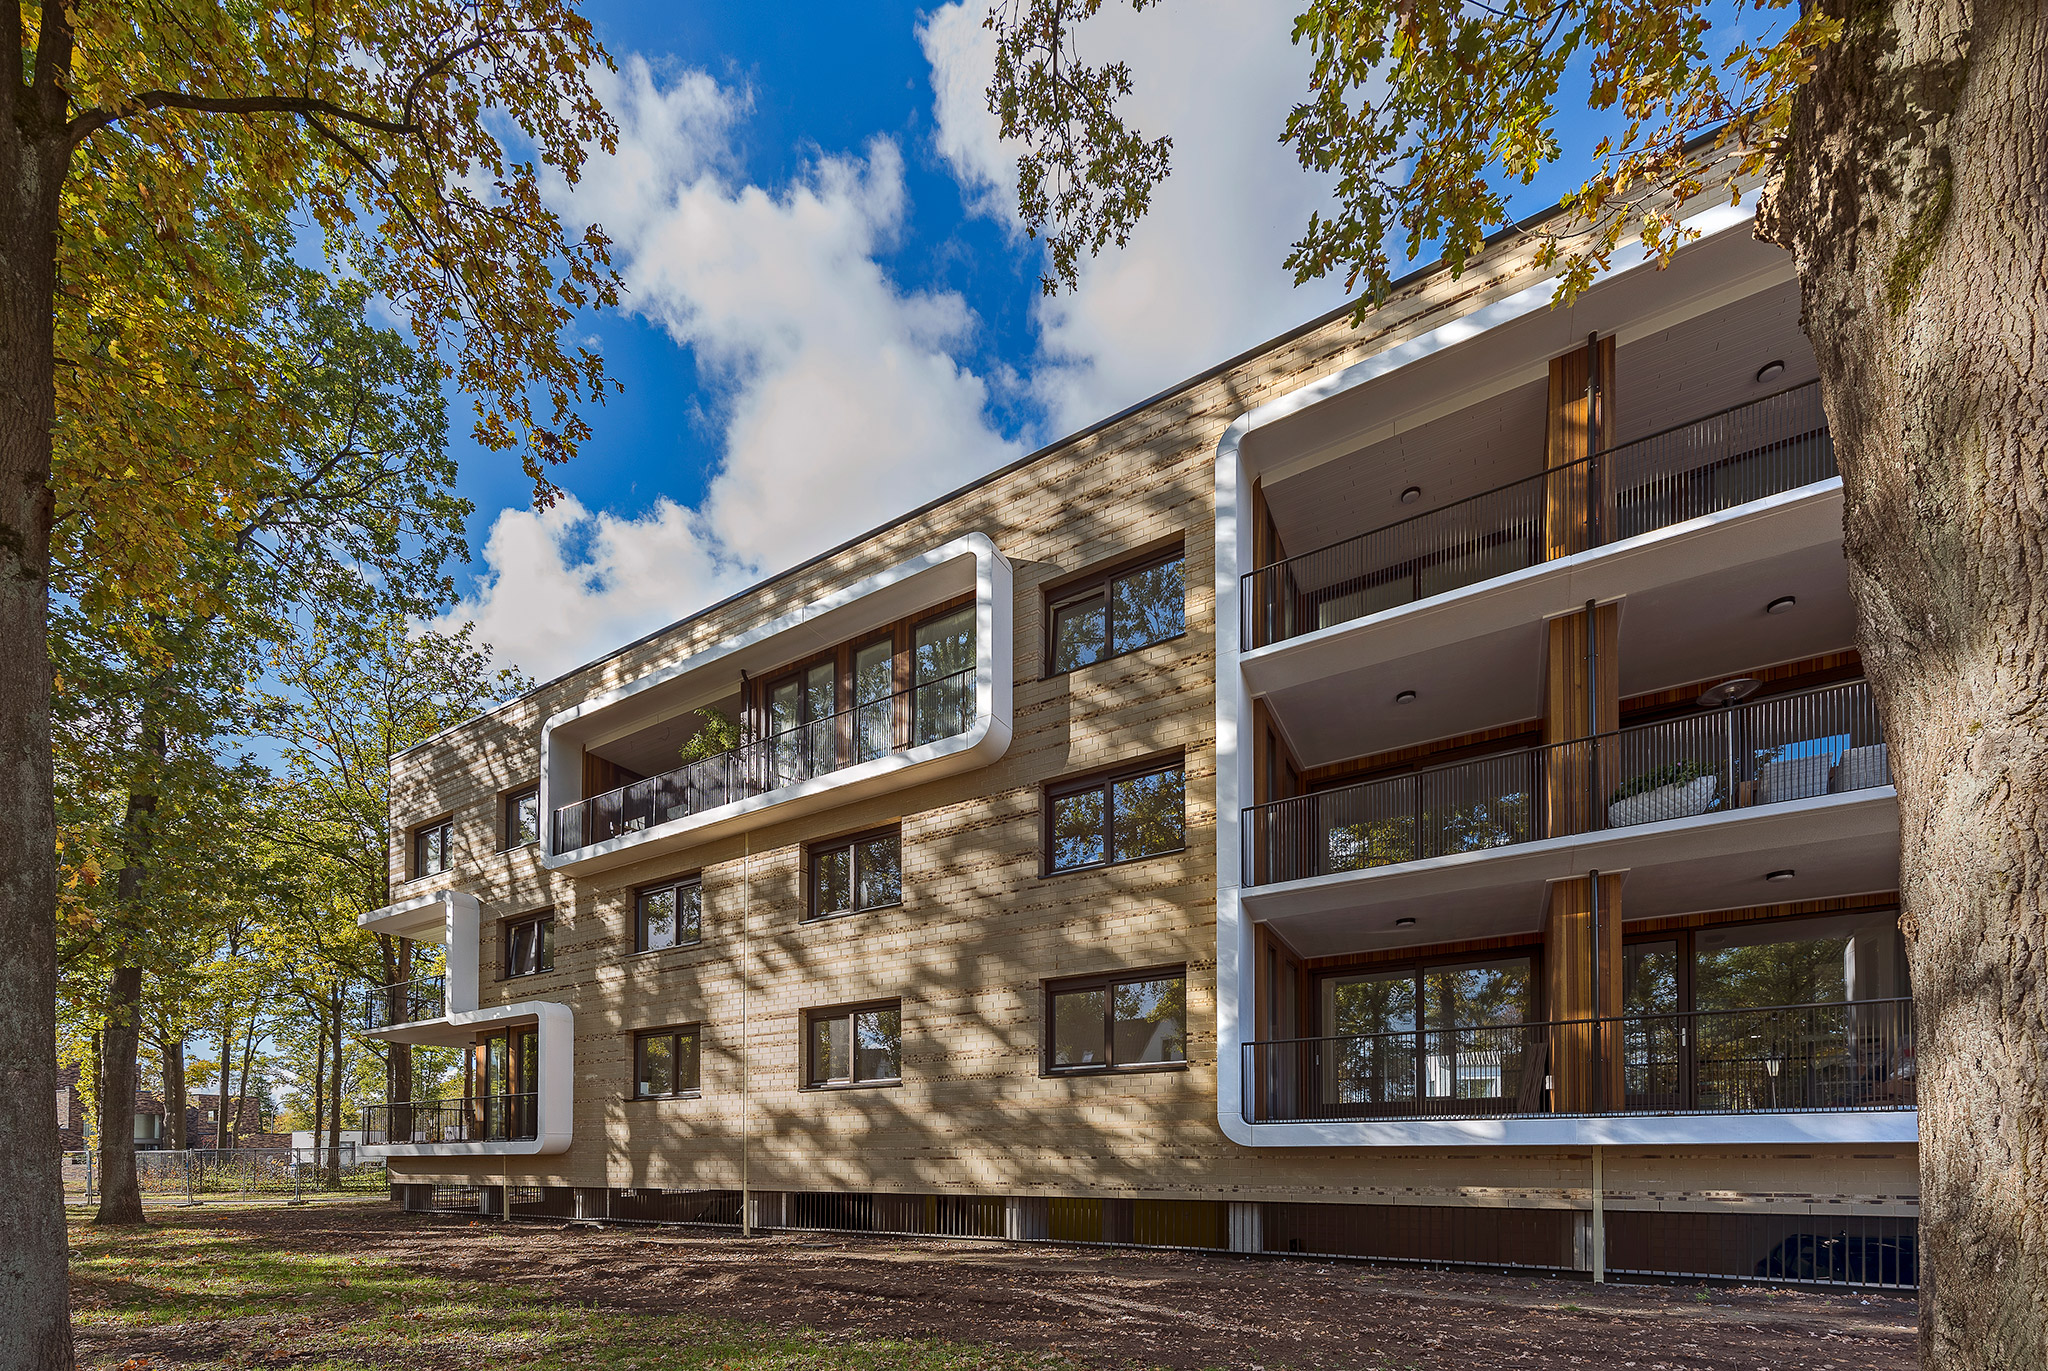 Simone Drost Architecture Planet Lab Architecture Appartementen Stadhouderspark Vught voorgevel in bos 